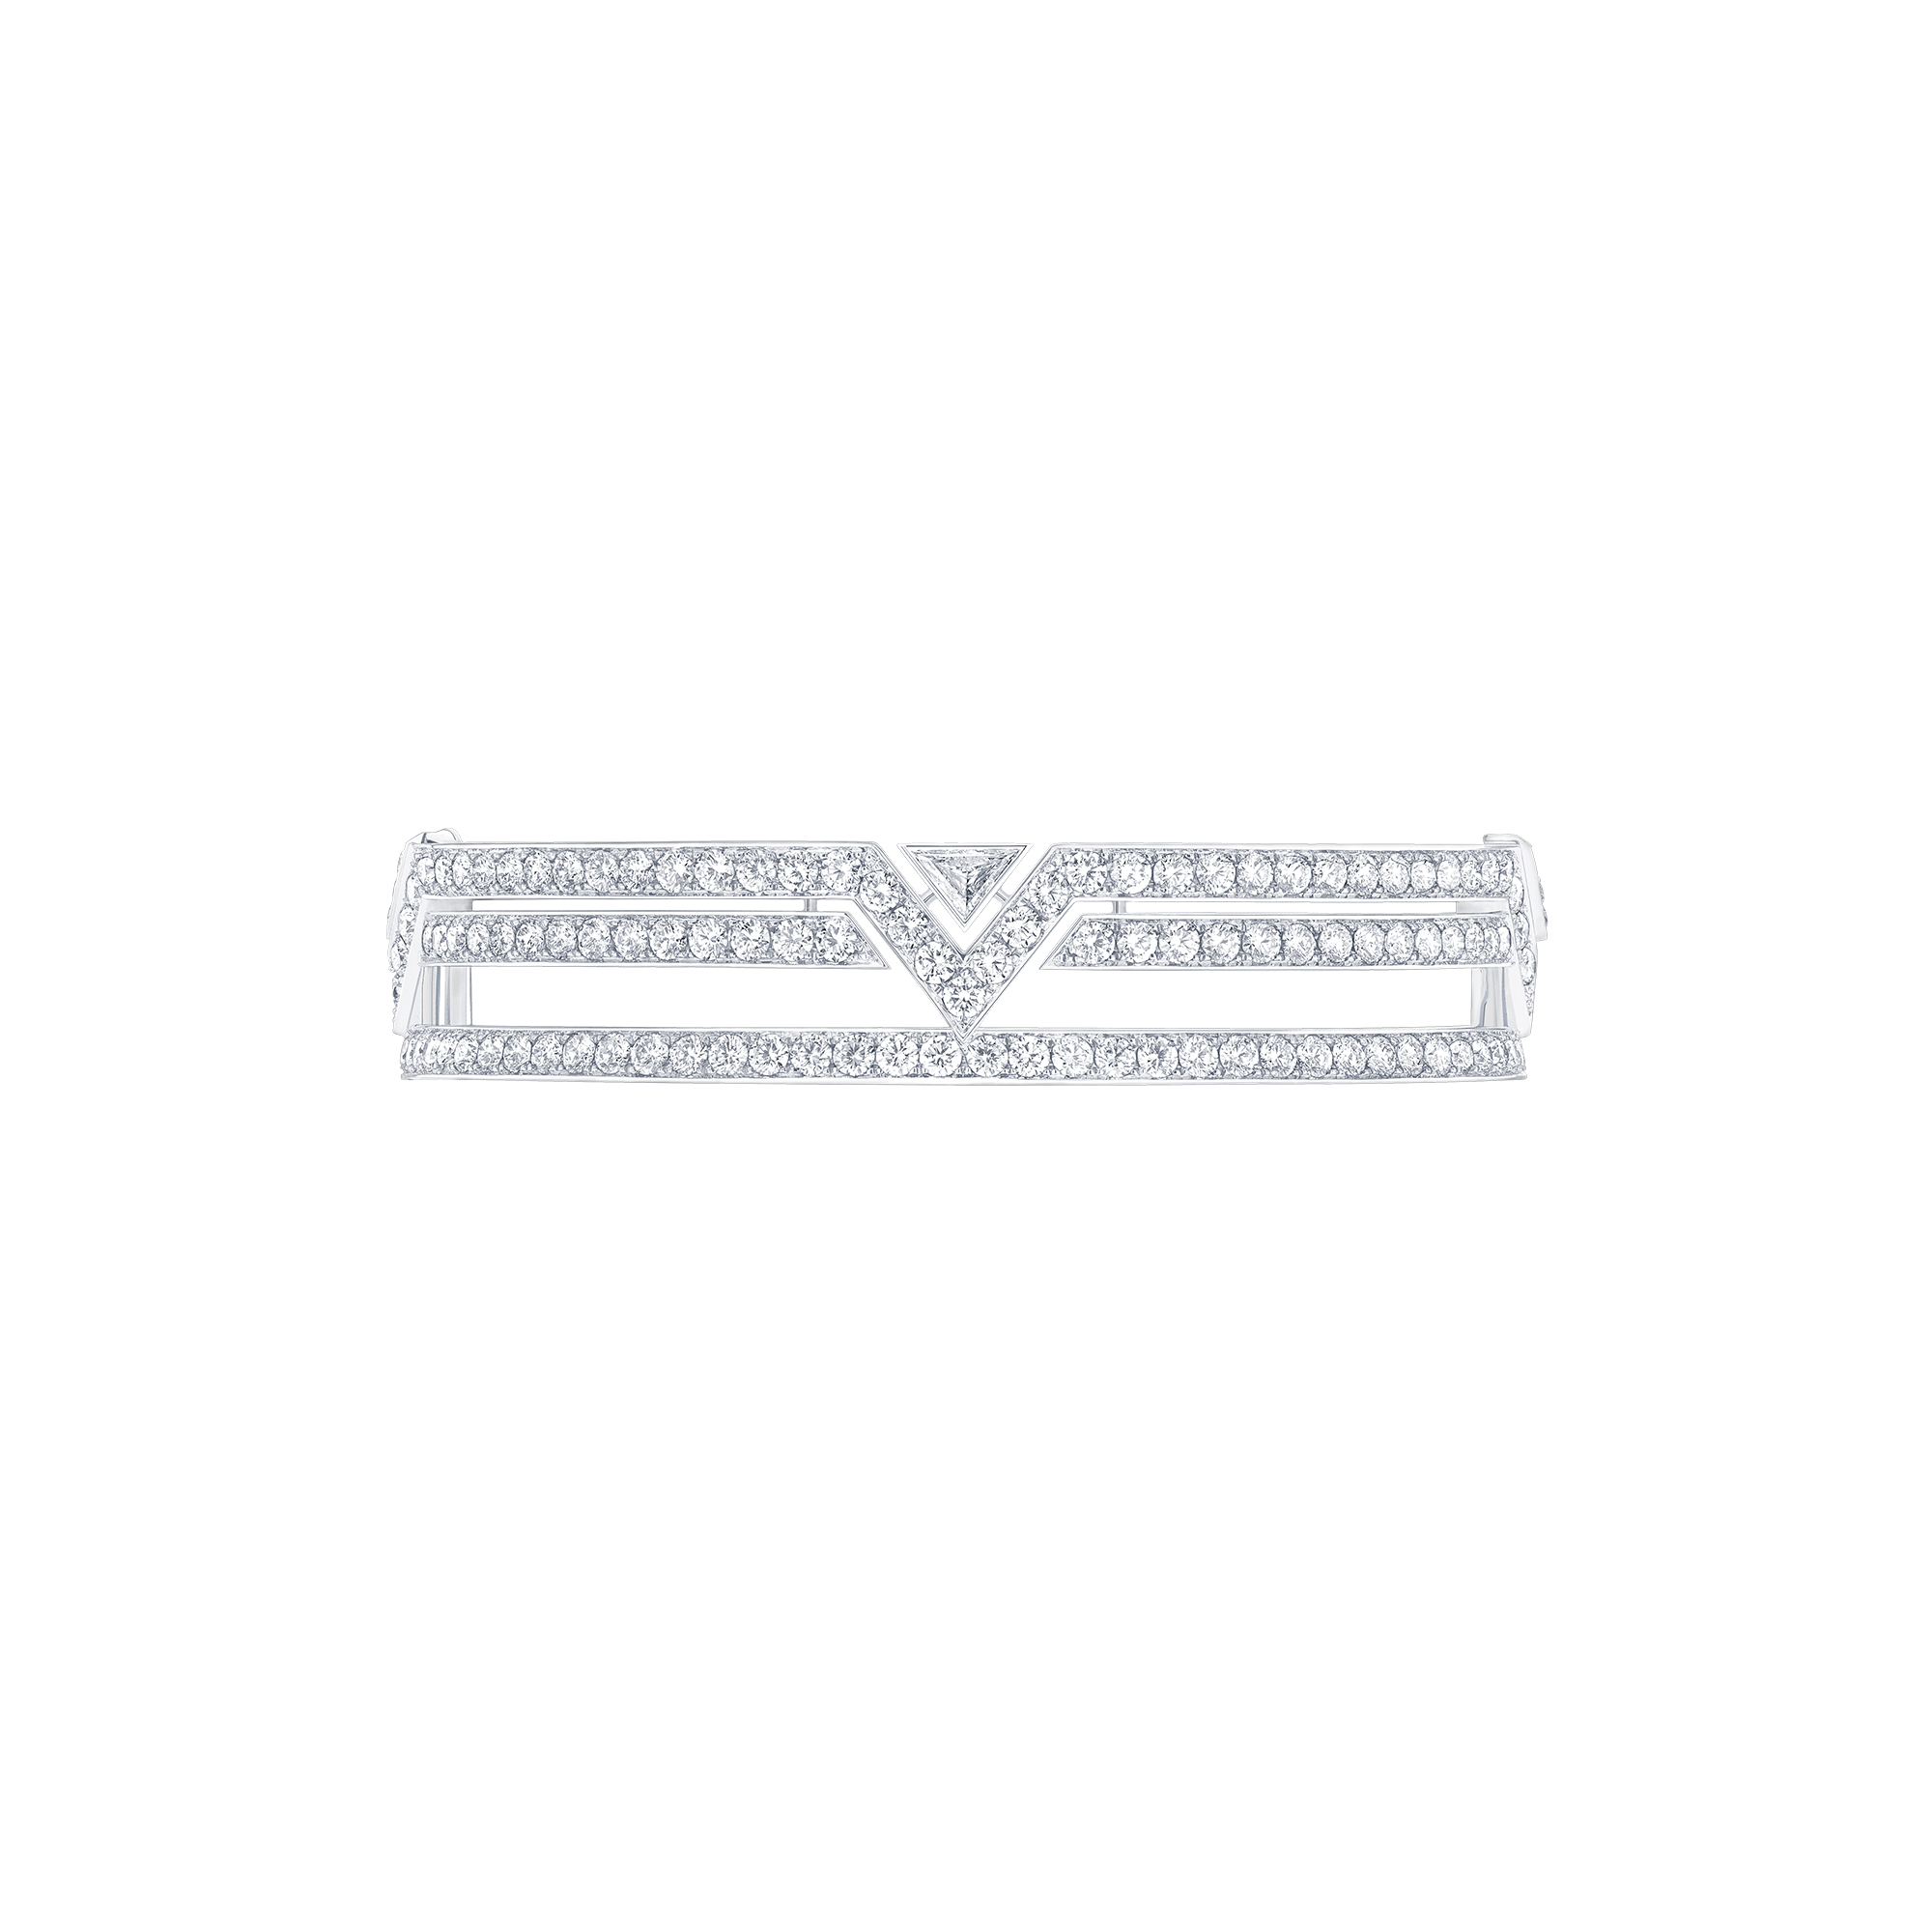 PURE V The emblem of high jewellery by Louis Vuitton - Numéro